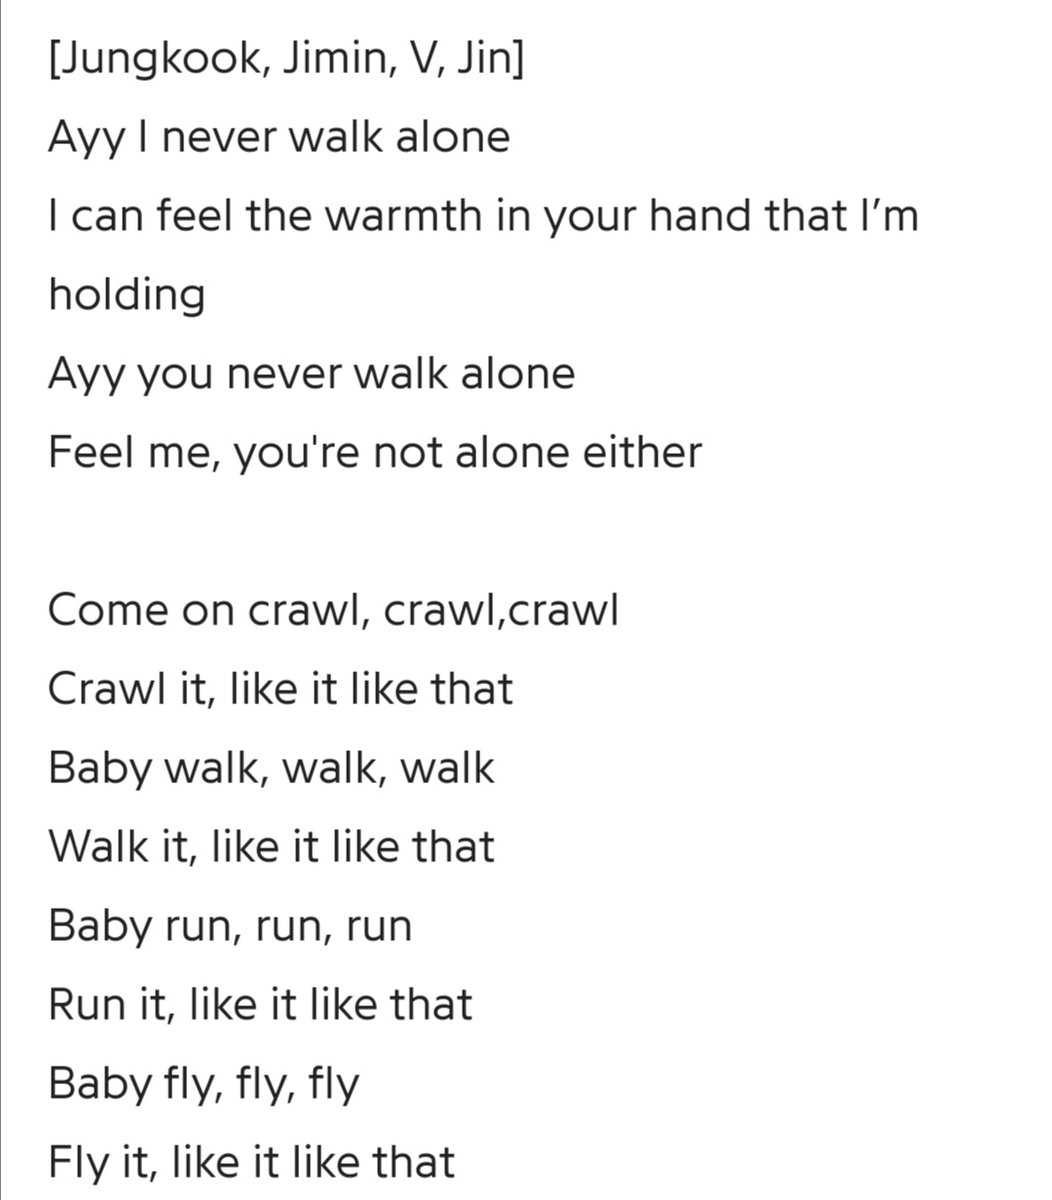 Italian Army Theorist The Song You Ll Never Walk Alone Is From A Broadway Musical Called Exactly Carousel This Song Has A Long And Meaningful Story And Has Become